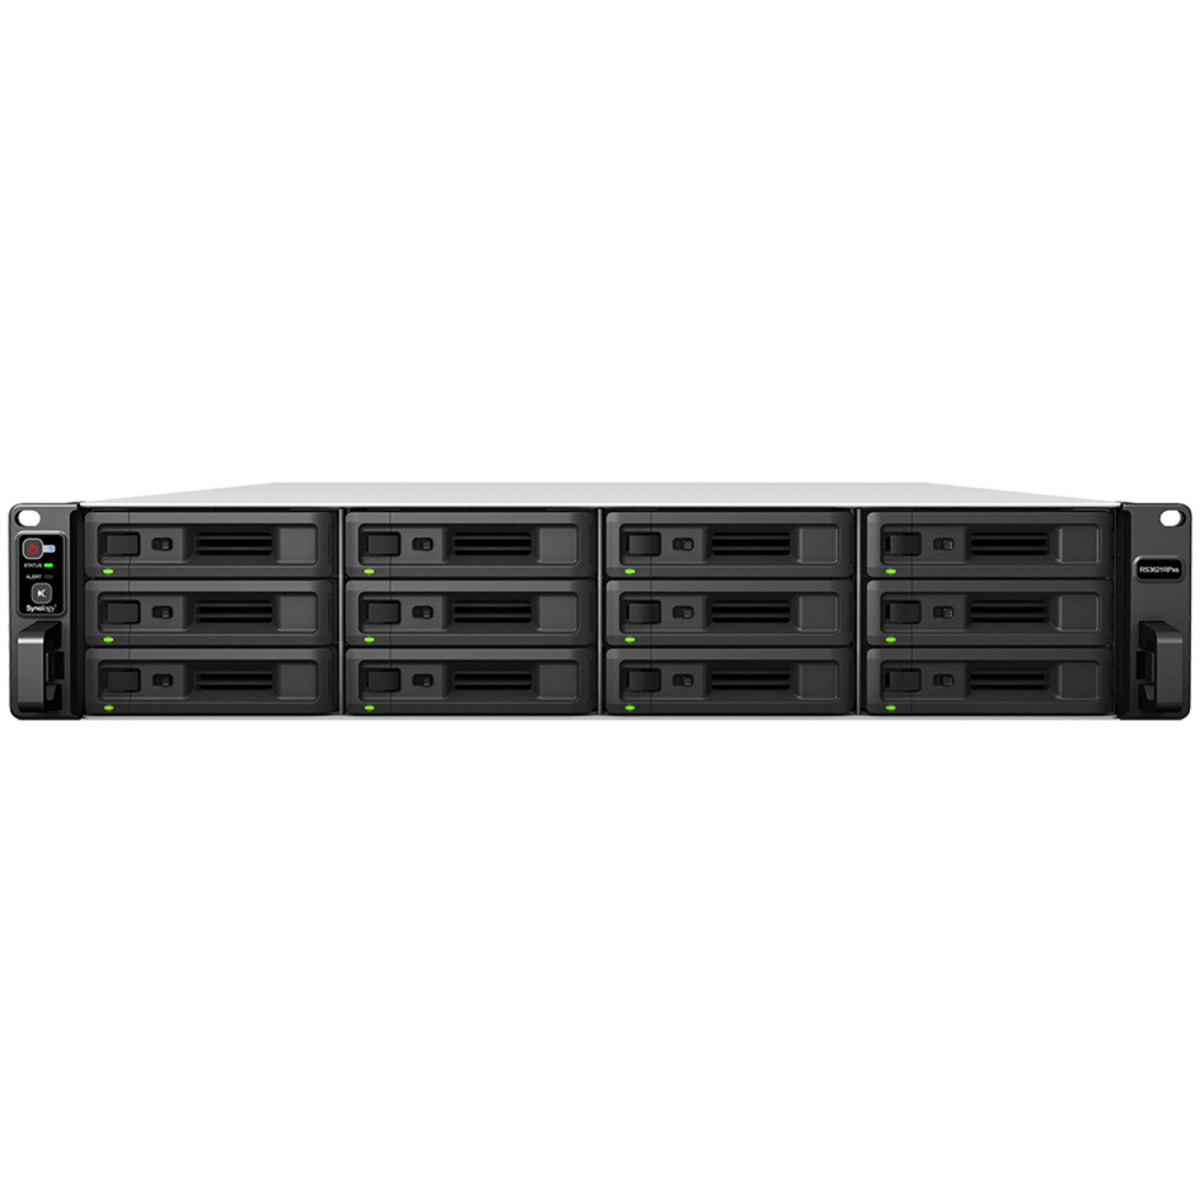 buy $7132 Synology RackStation RS3621RPxs 96tb RackMount NAS - Network Attached Storage Device 12x8000gb Western Digital Ultrastar DC HC320 HUS728T8TALE6L4 3.5 7200rpm SATA 6Gb/s HDD ENTERPRISE Class Drives Installed - Burn-In Tested - nas headquarters buy network attached storage server device das new raid-5 free shipping usa christmas new year holiday sale RackStation RS3621RPxs